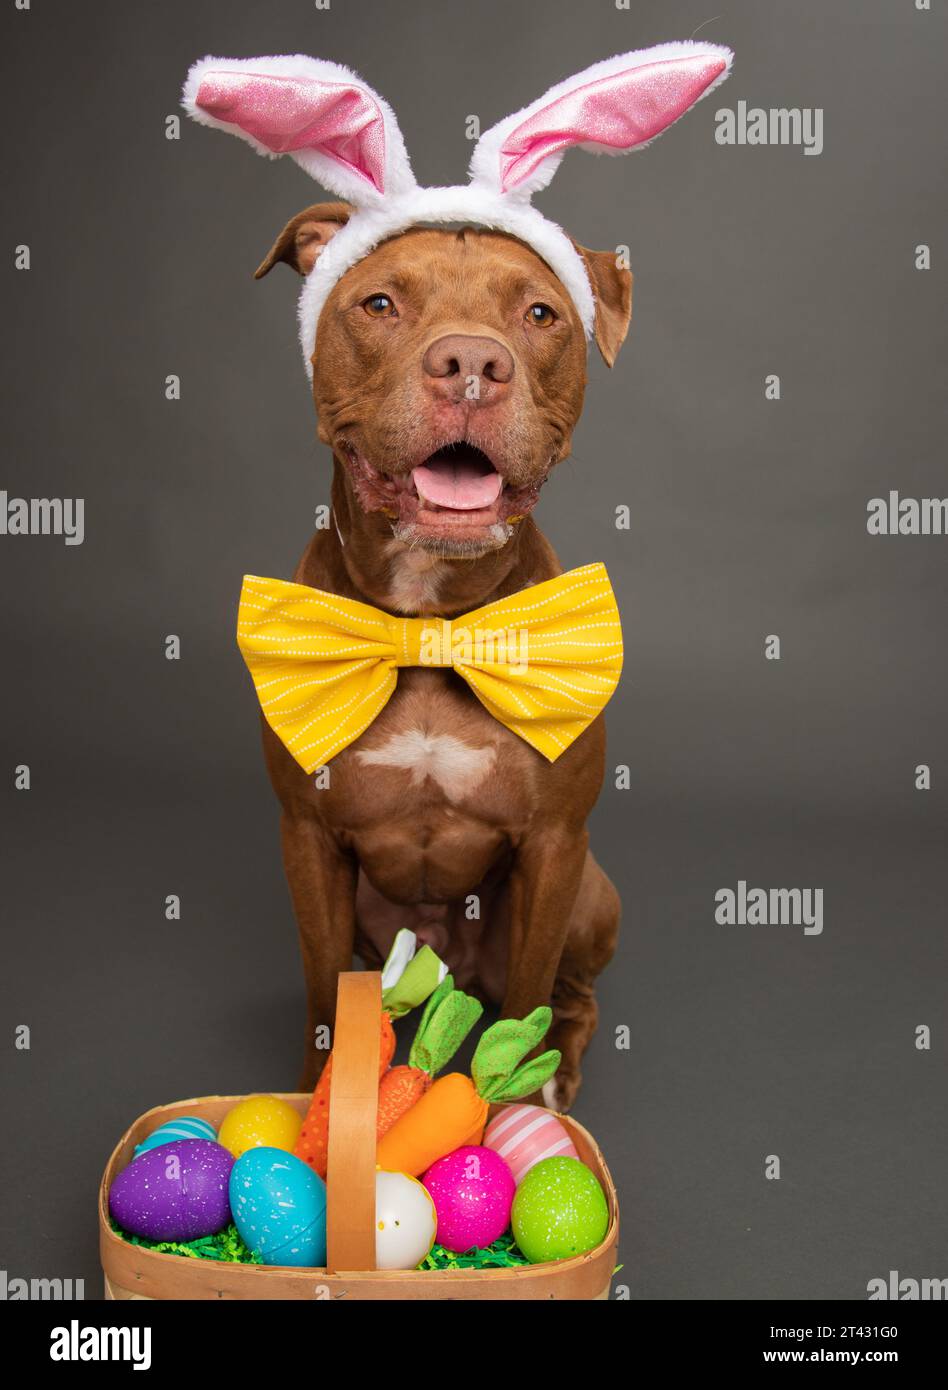 Staffordshire bull terrier dog dressed as an Easter bunny siting next to a basket filled with painted easter eggs Stock Photo